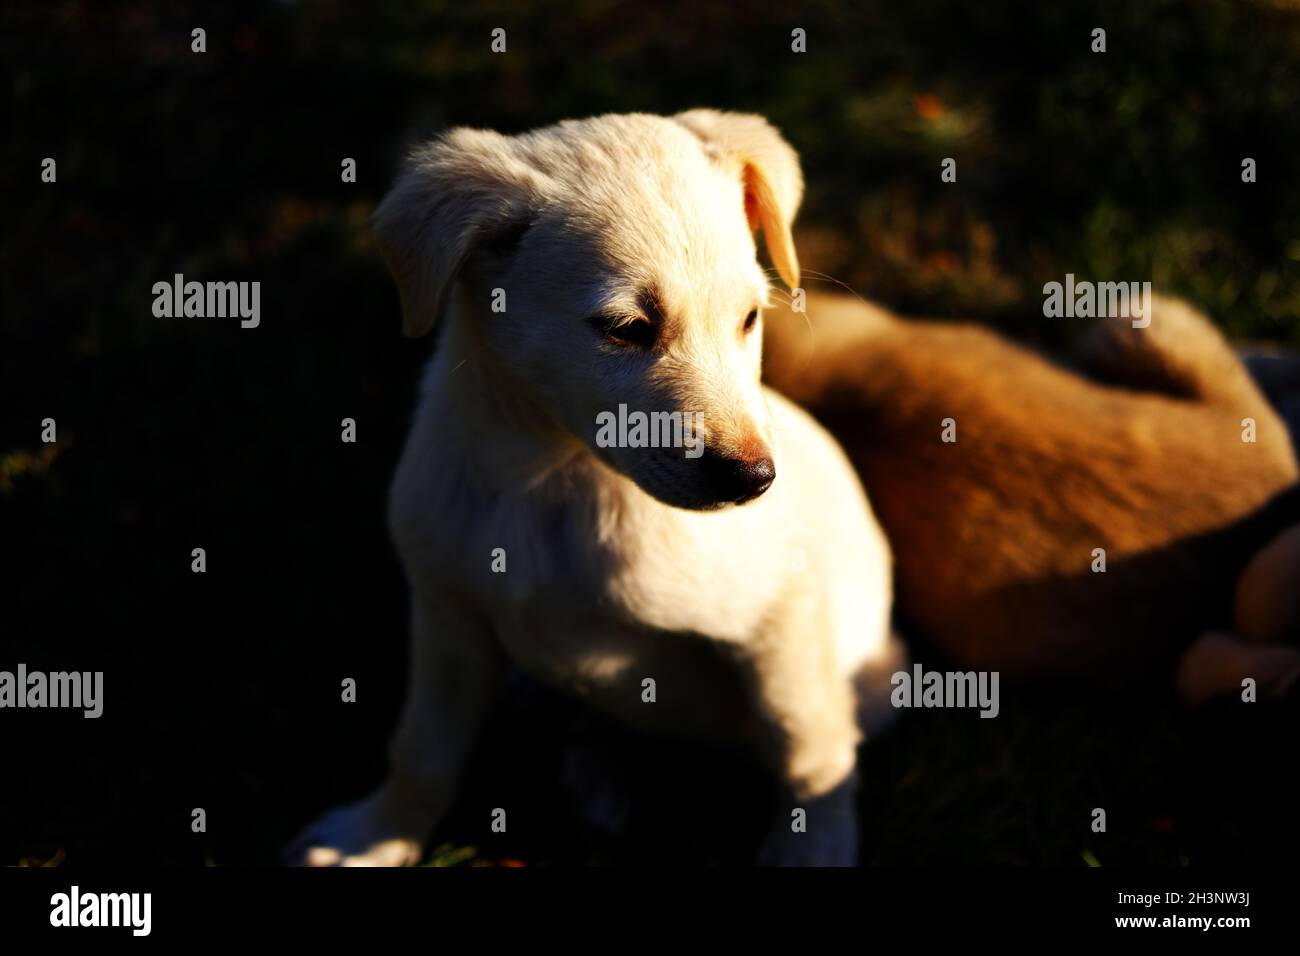 White small puppy dog outdoor on grass in shadow with sun on face Stock Photo